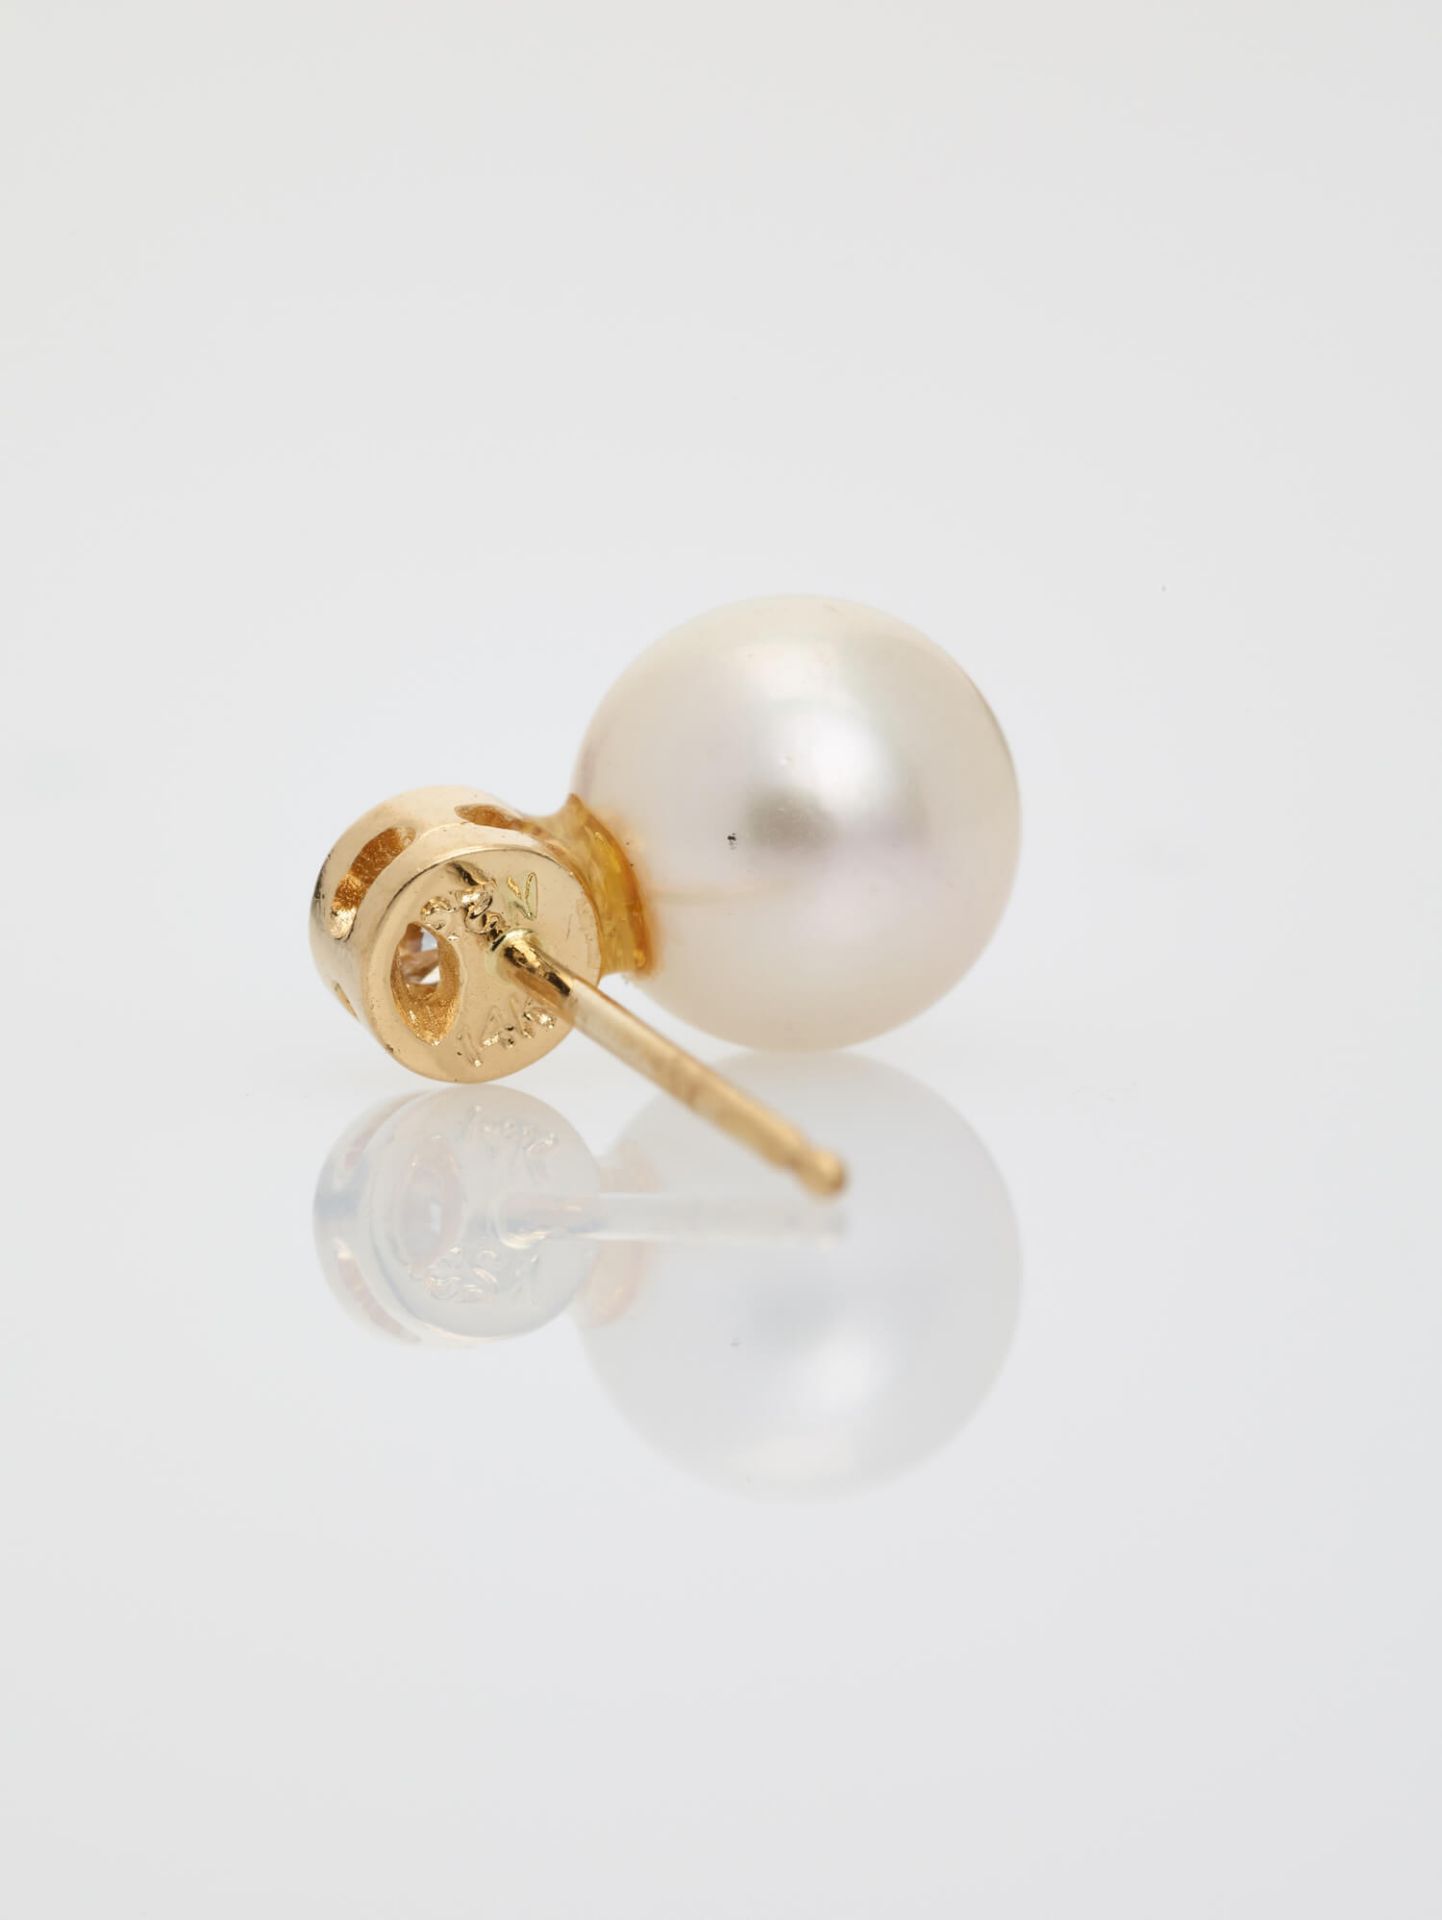 A PAIR OF 14 CARAT YELLOW GOLD EAR STUDS WITH PEARLS AND DIAMONDS hallmarked ‘14K’ and with a - Image 3 of 5